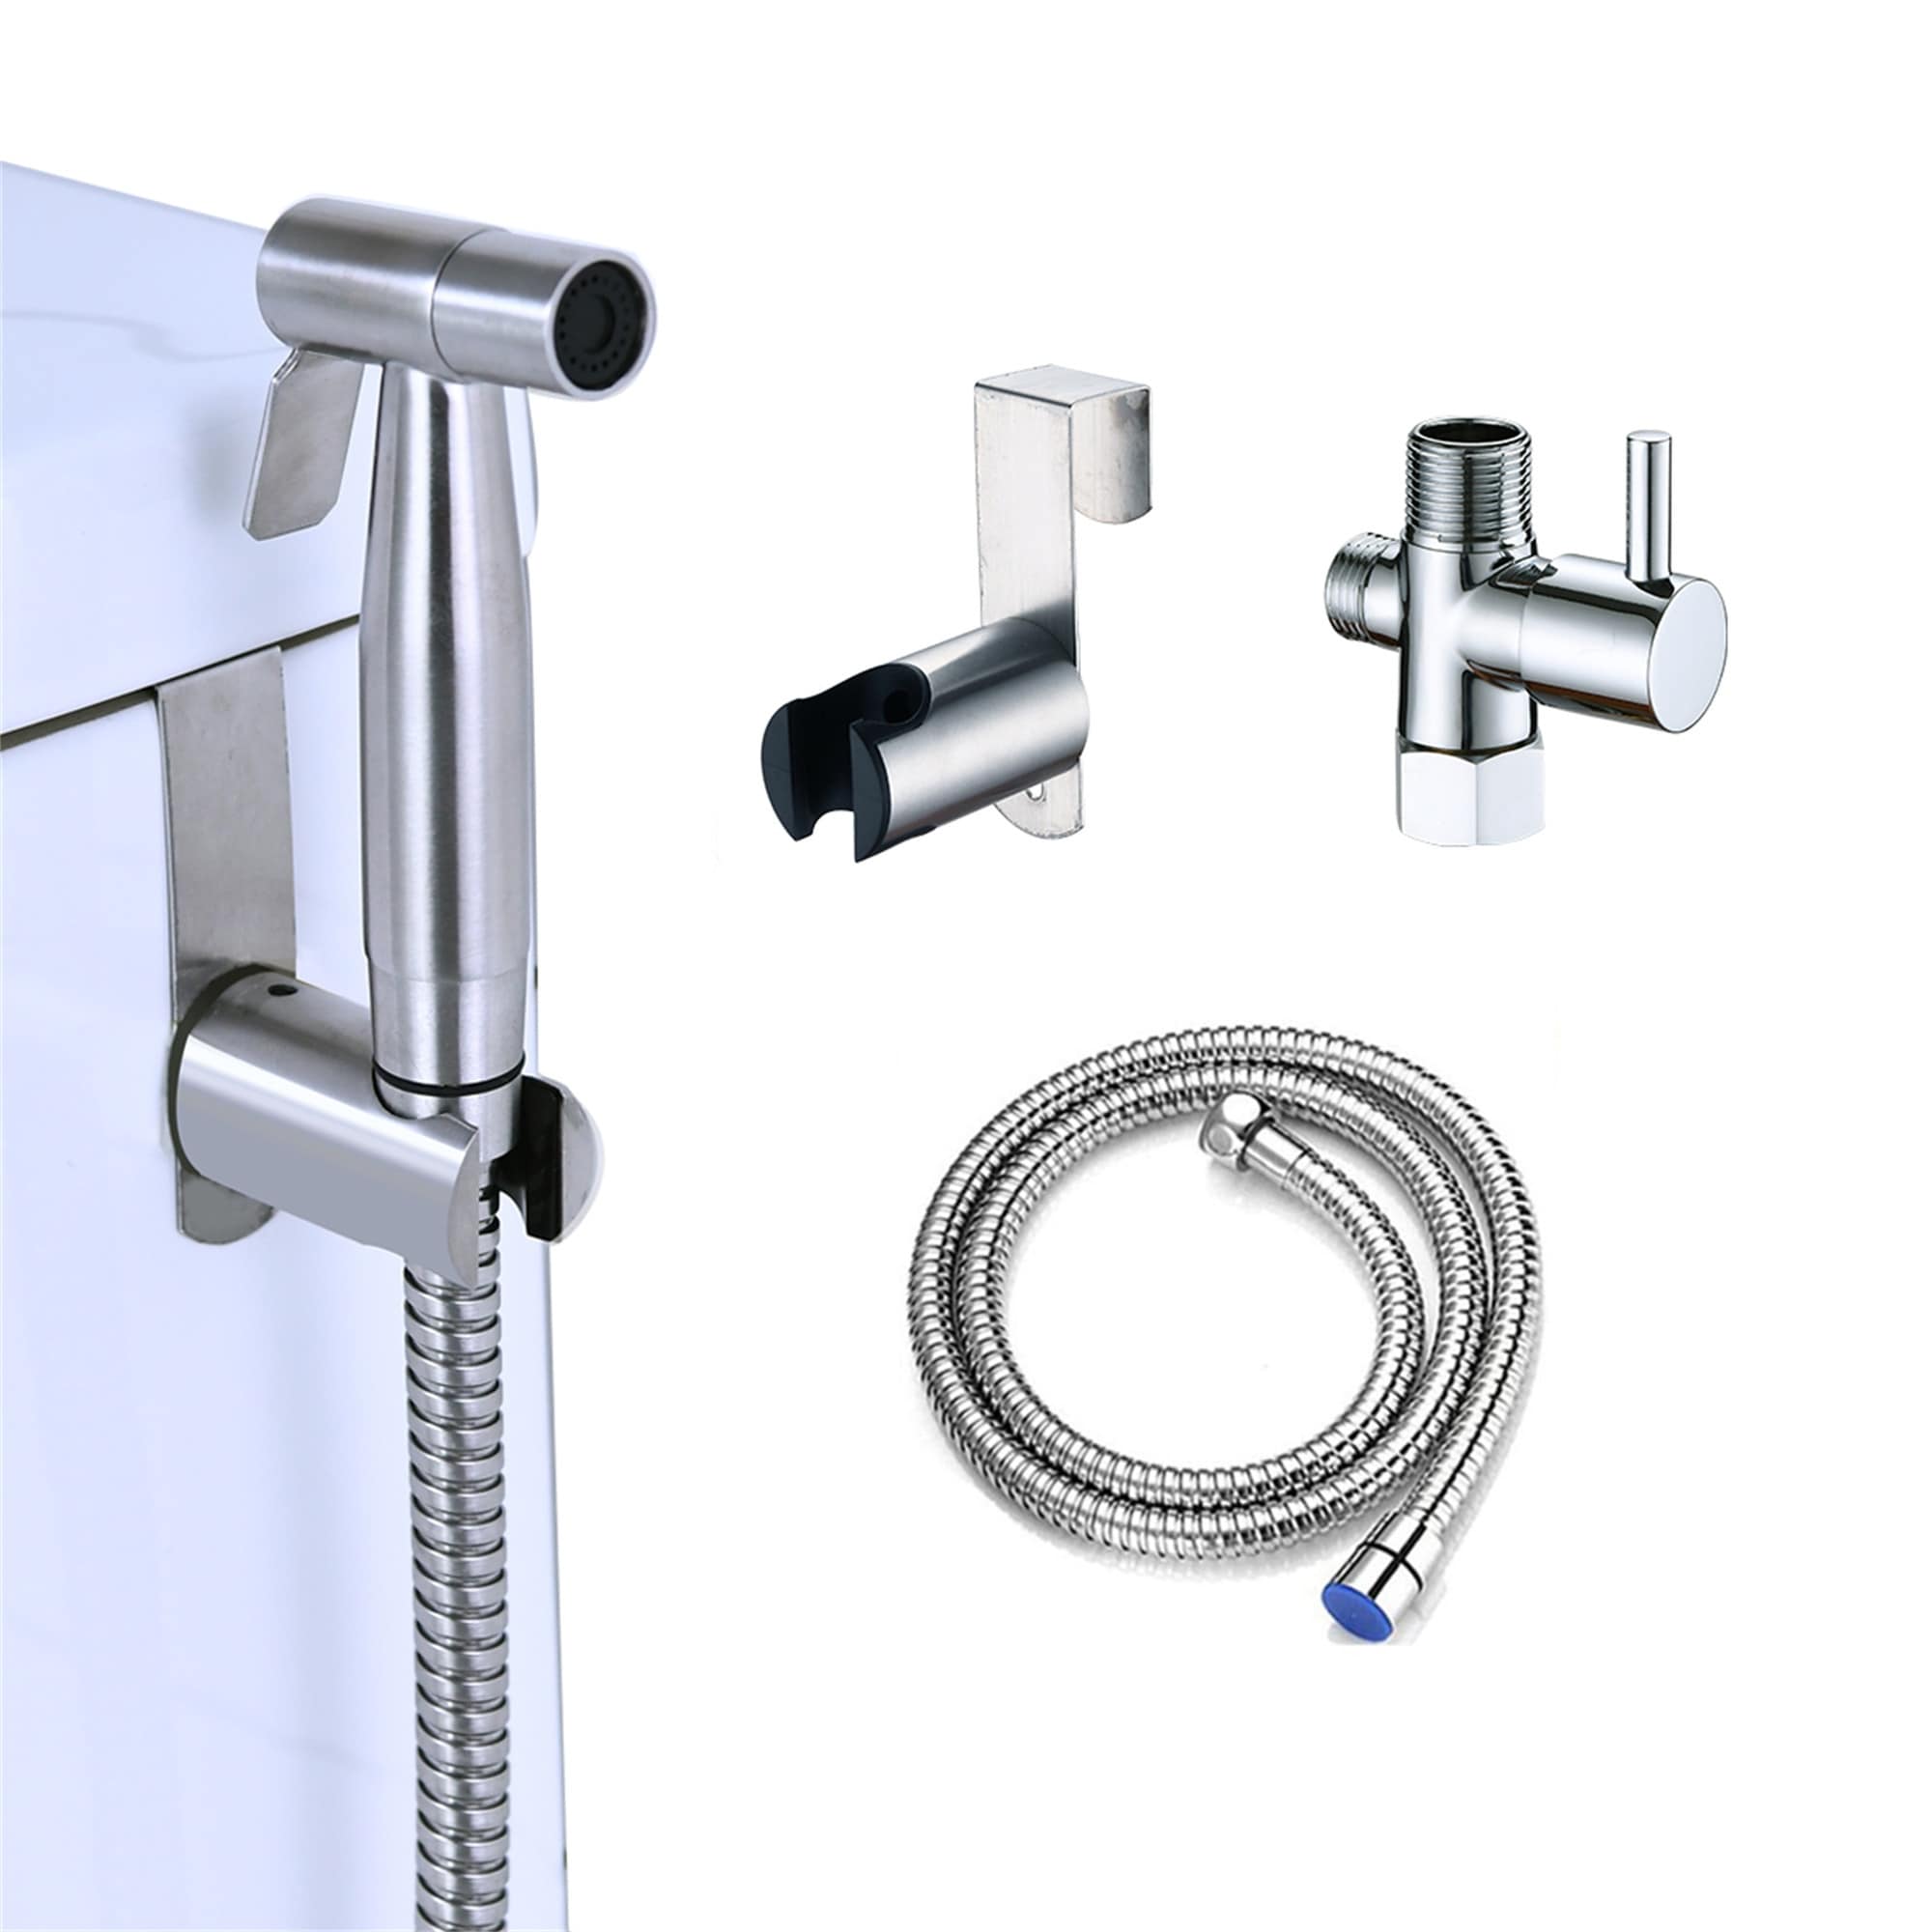 https://ak1.ostkcdn.com/images/products/is/images/direct/66bee03850fc991ef57179dee691052e0fb1980a/Handheld-Bidet-Sprayer-for-Toilet-Stainless-Steel-Brushed-Nickel-Cloth-Diaper-Bidet-Toilet-Sprayer-for-Feminine-Wash%2C-Baby-Wash.jpg